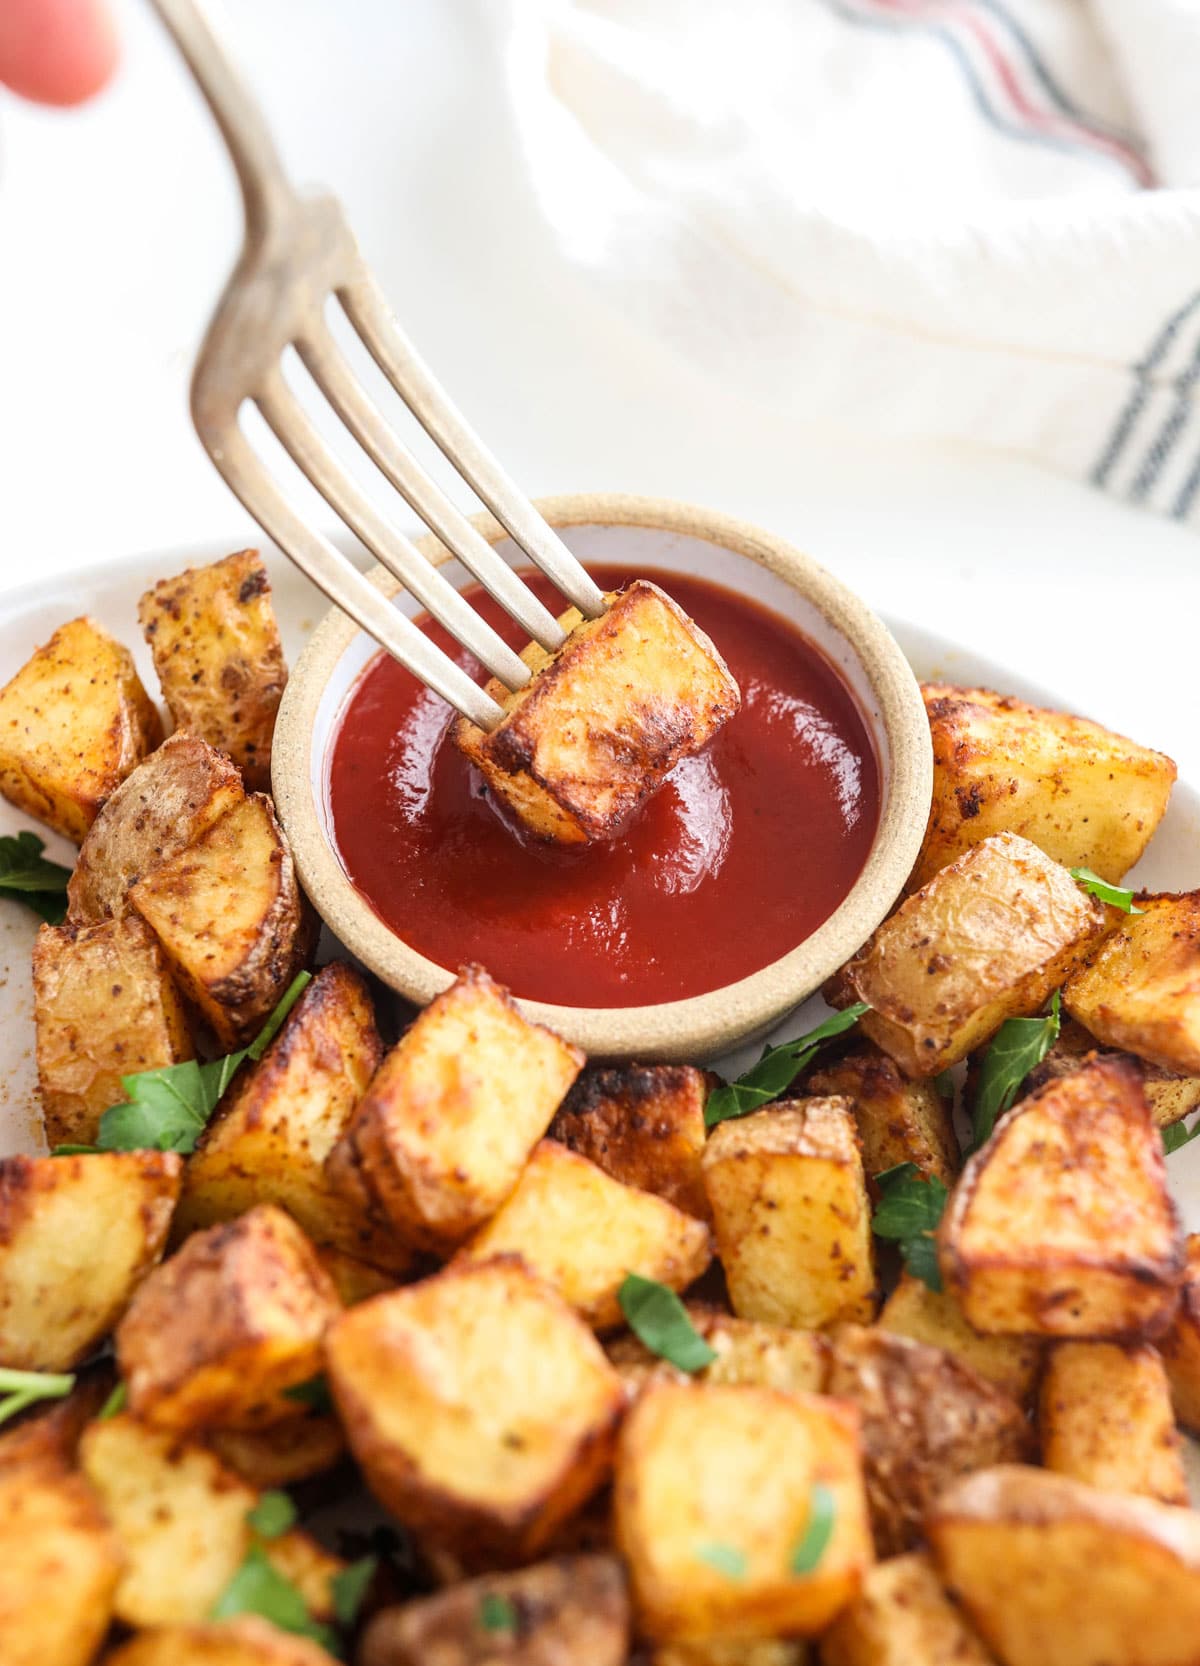 crispy potato on a fork in ketchup